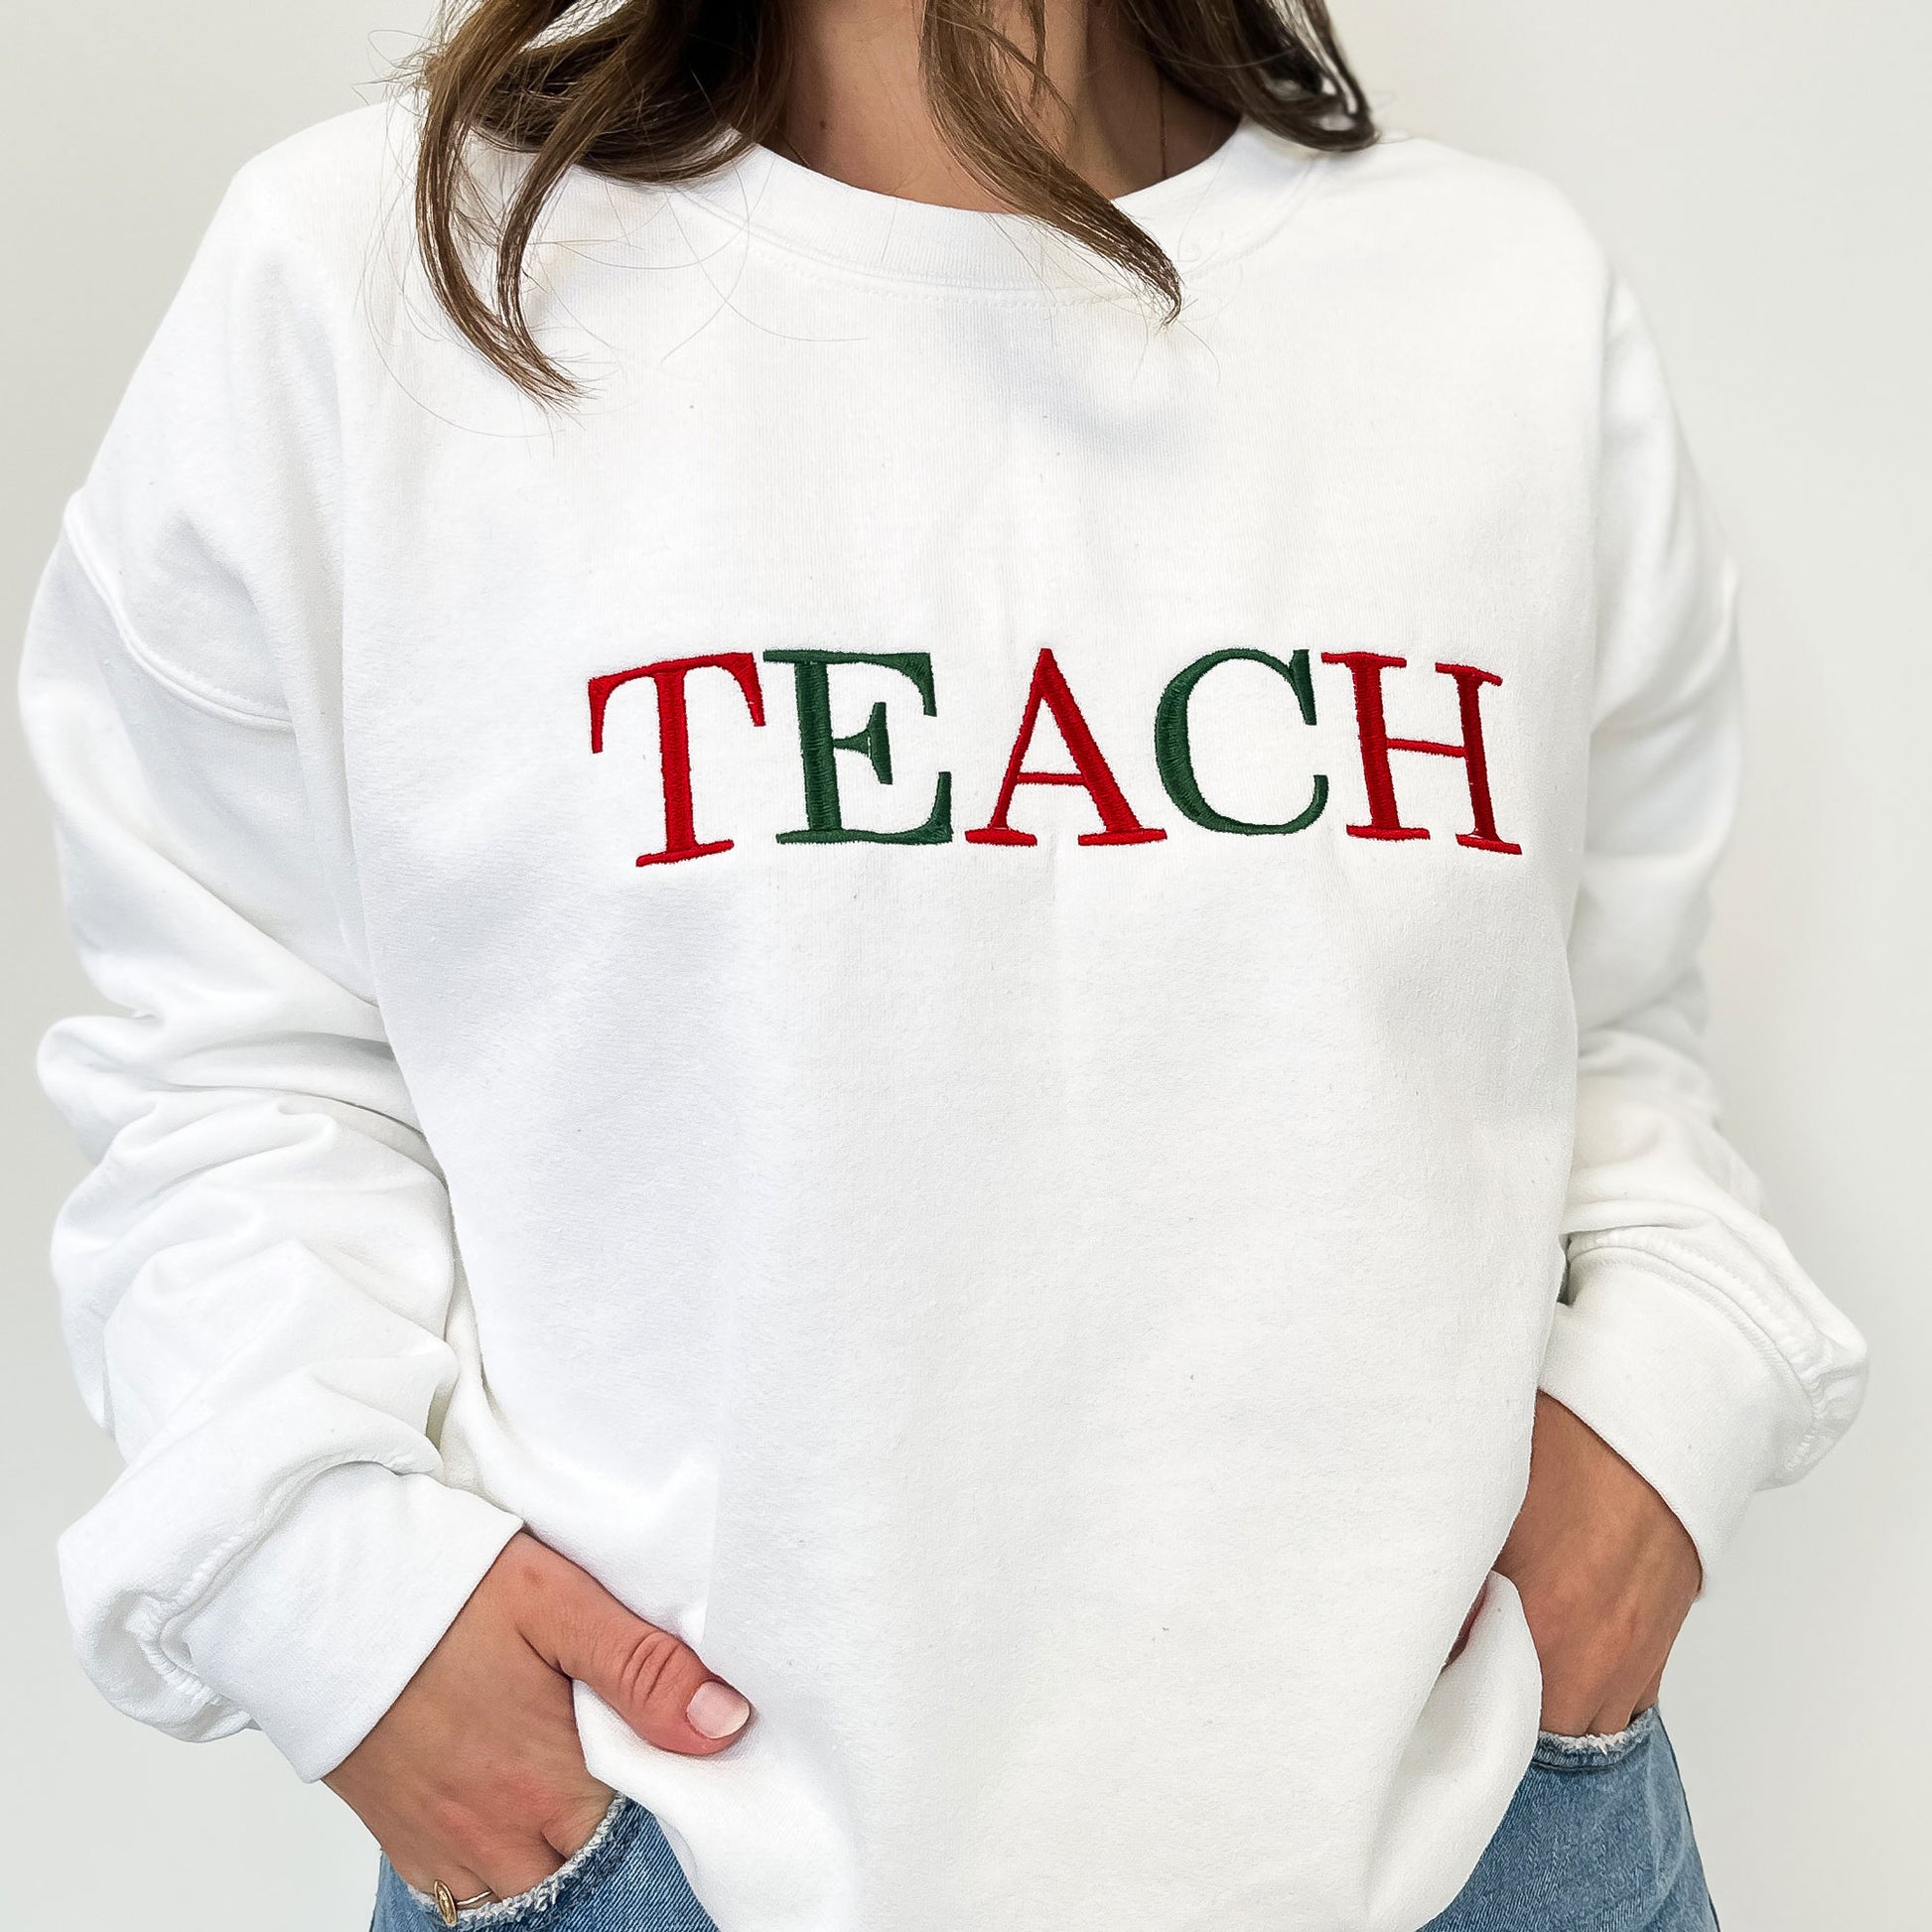 Close up of a woman wearing a white crewneck sweatshirt that has Teach embroidered in all uppercase letter in alternating red and green threads.